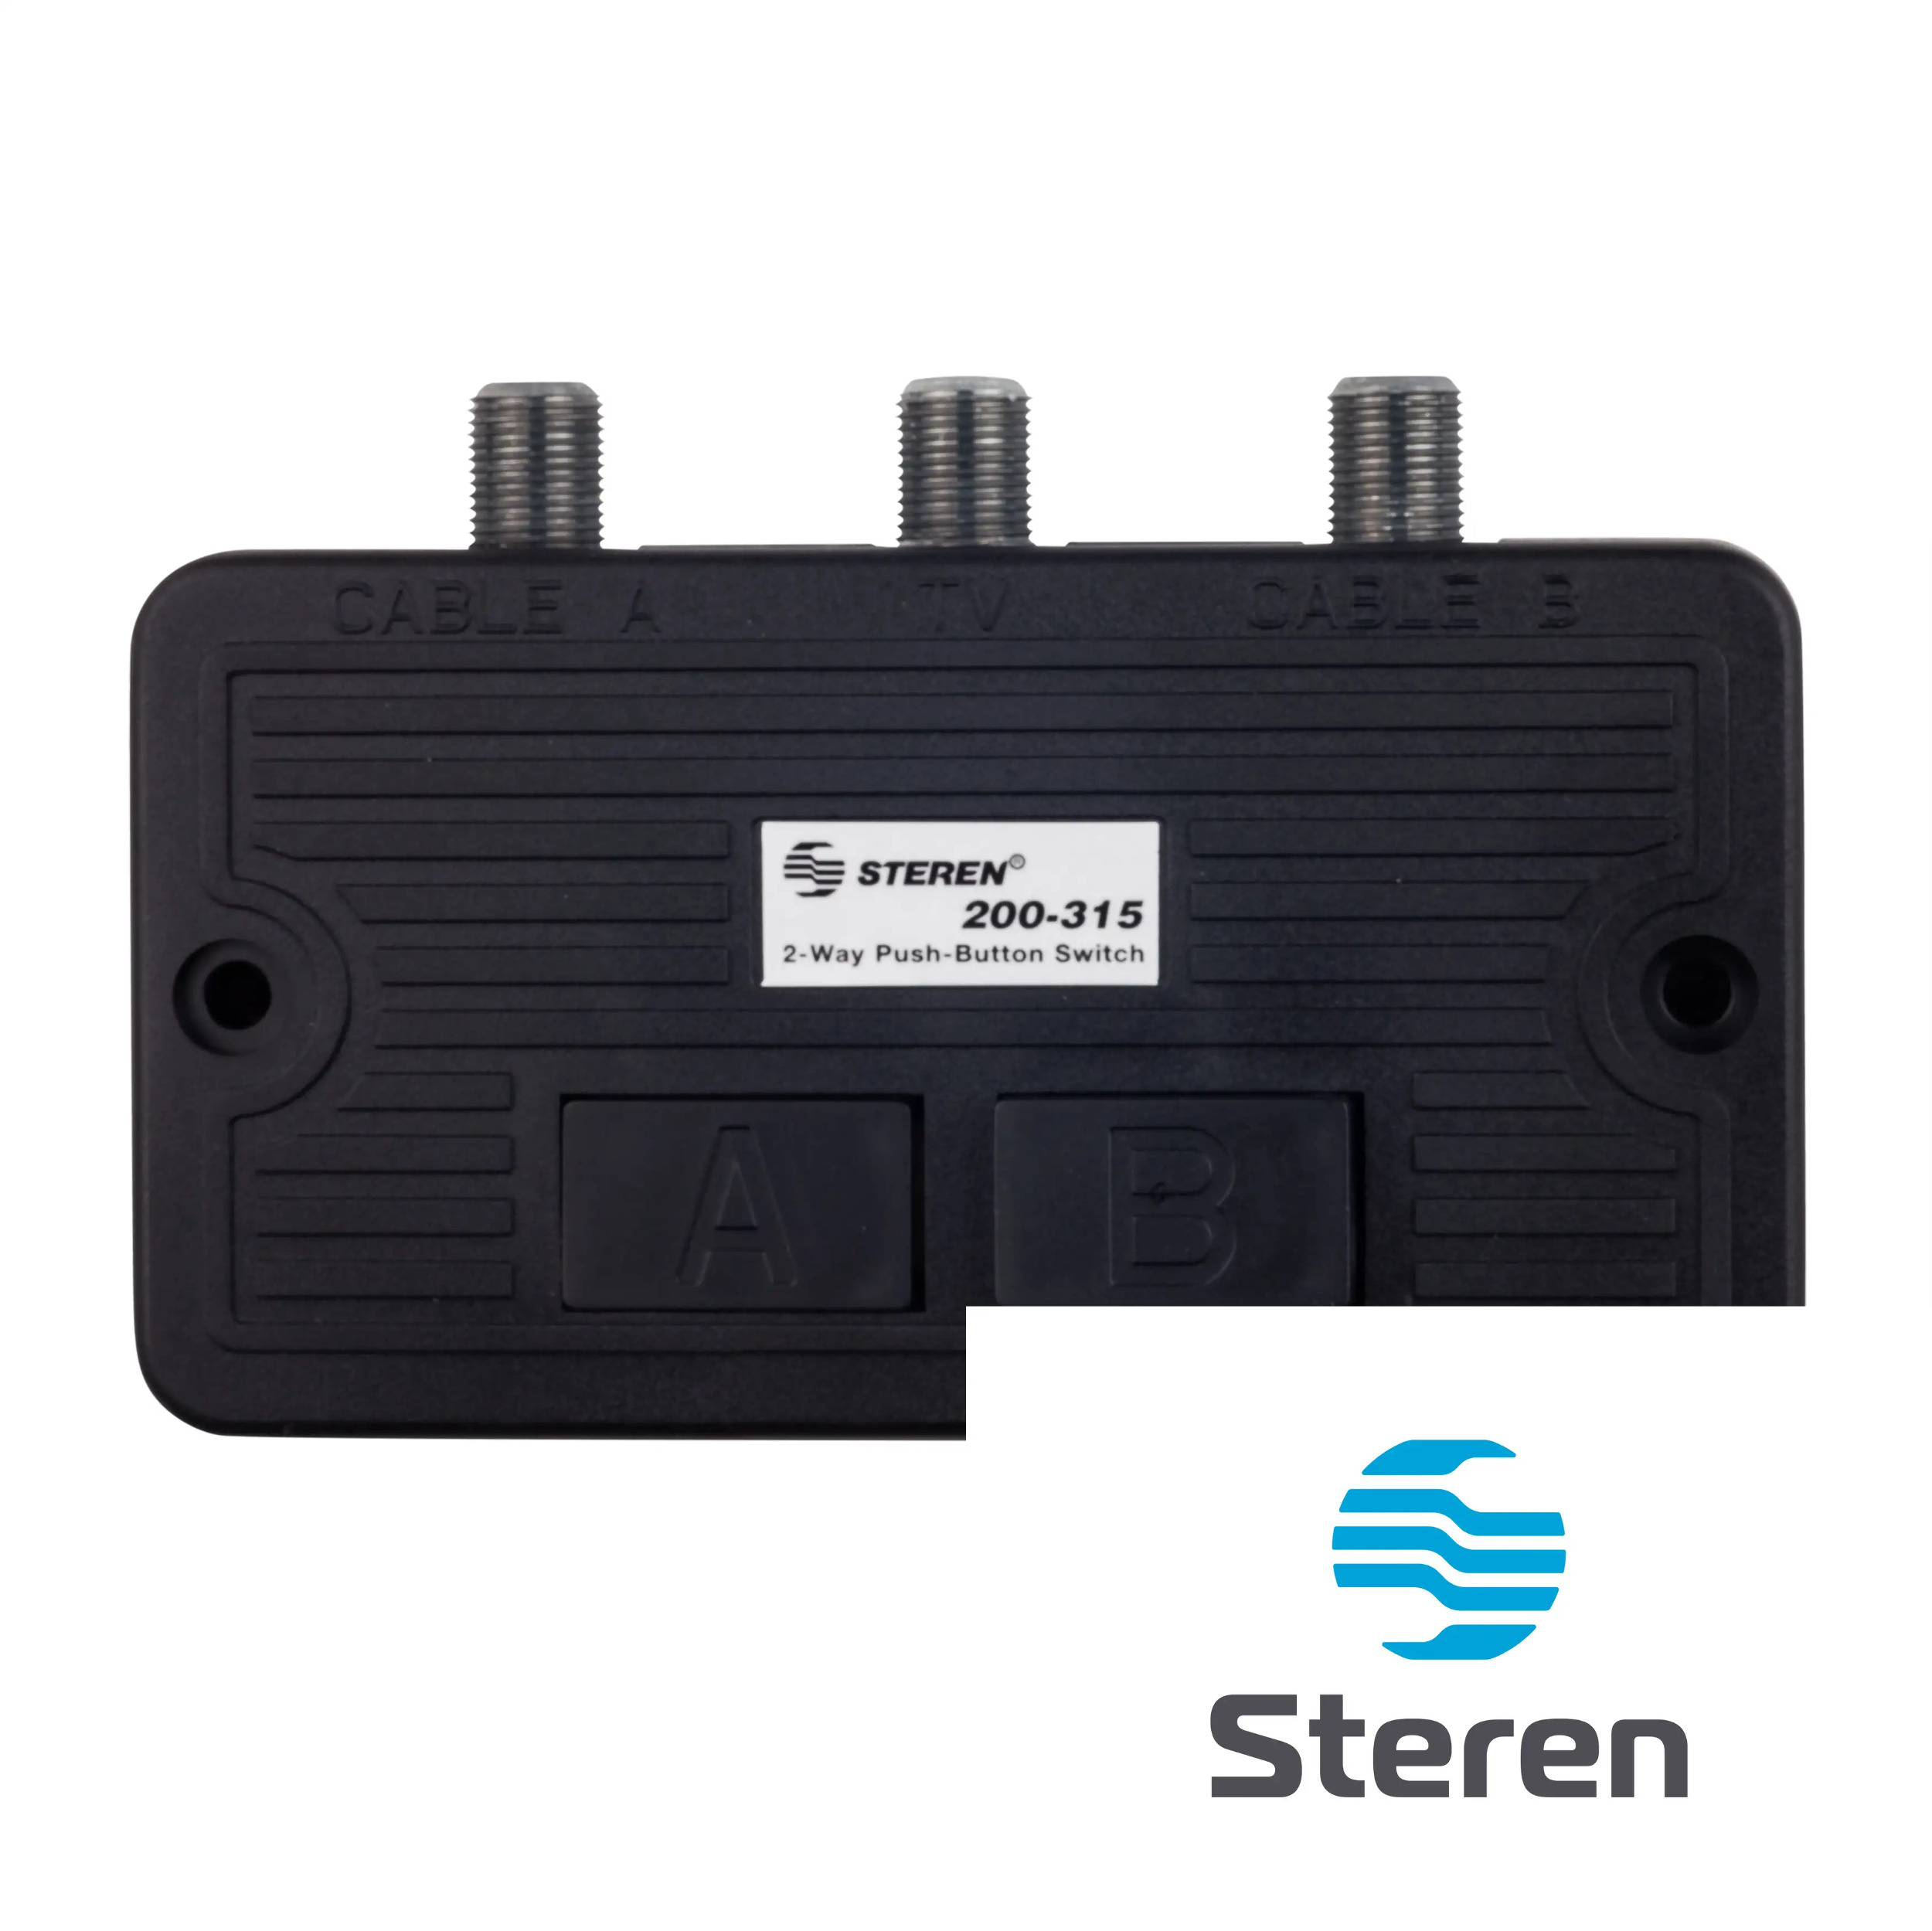 Steren 2-Way Coaxial A/B Push-Button Switch for TV, Antenna Splitter - 200-315 - image 1 of 4